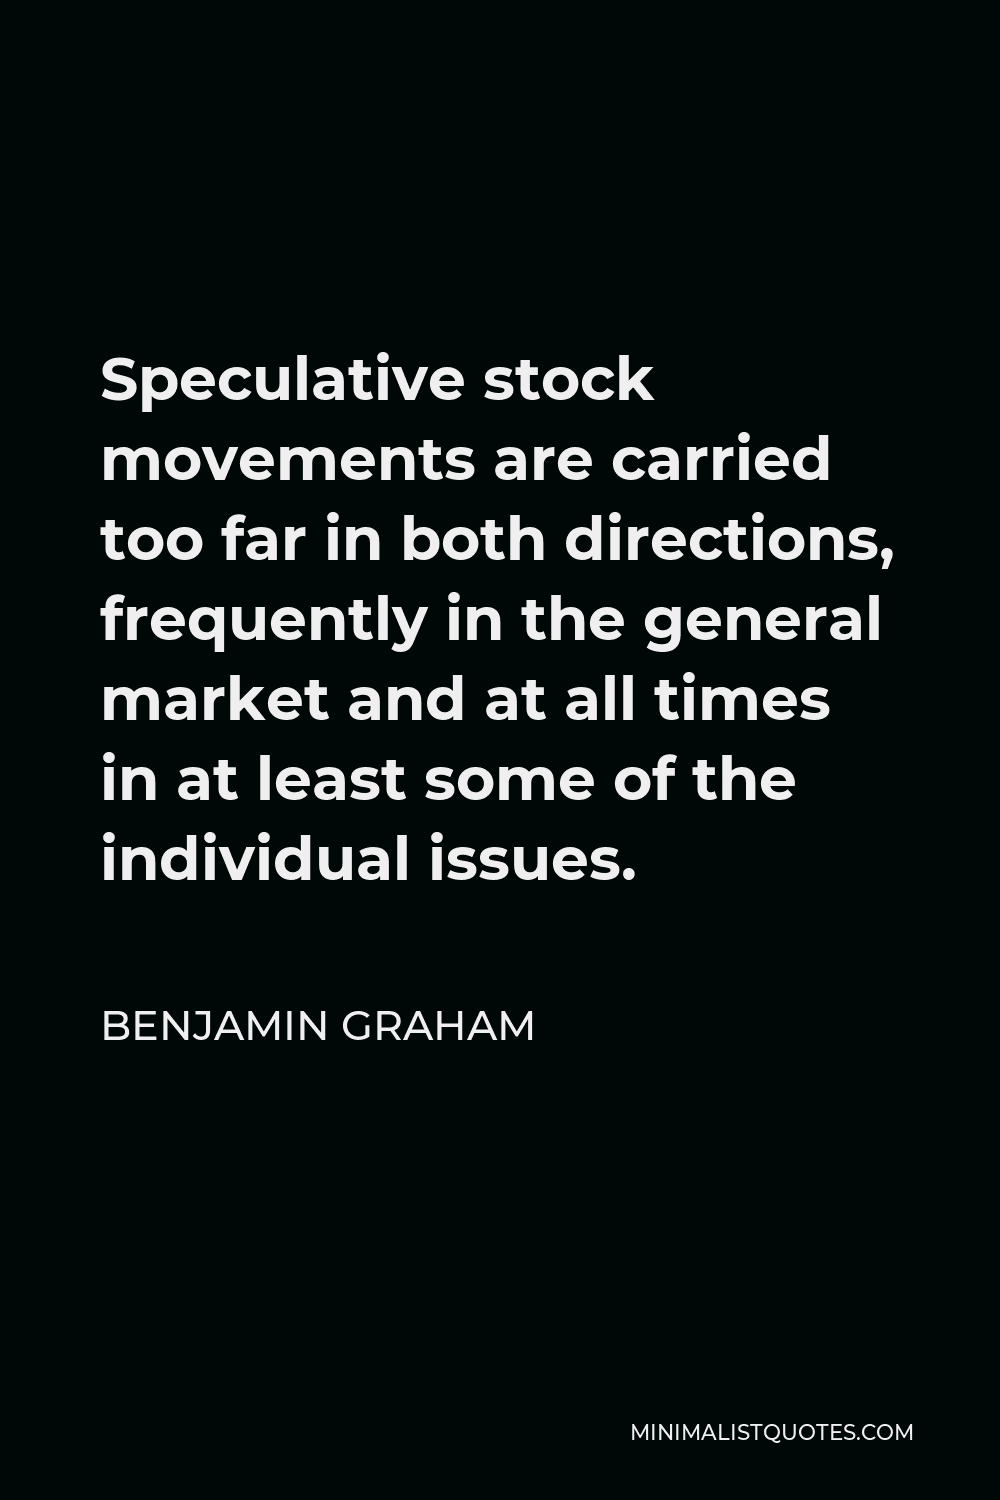 Benjamin Graham Quote - Speculative stock movements are carried too far in both directions, frequently in the general market and at all times in at least some of the individual issues.